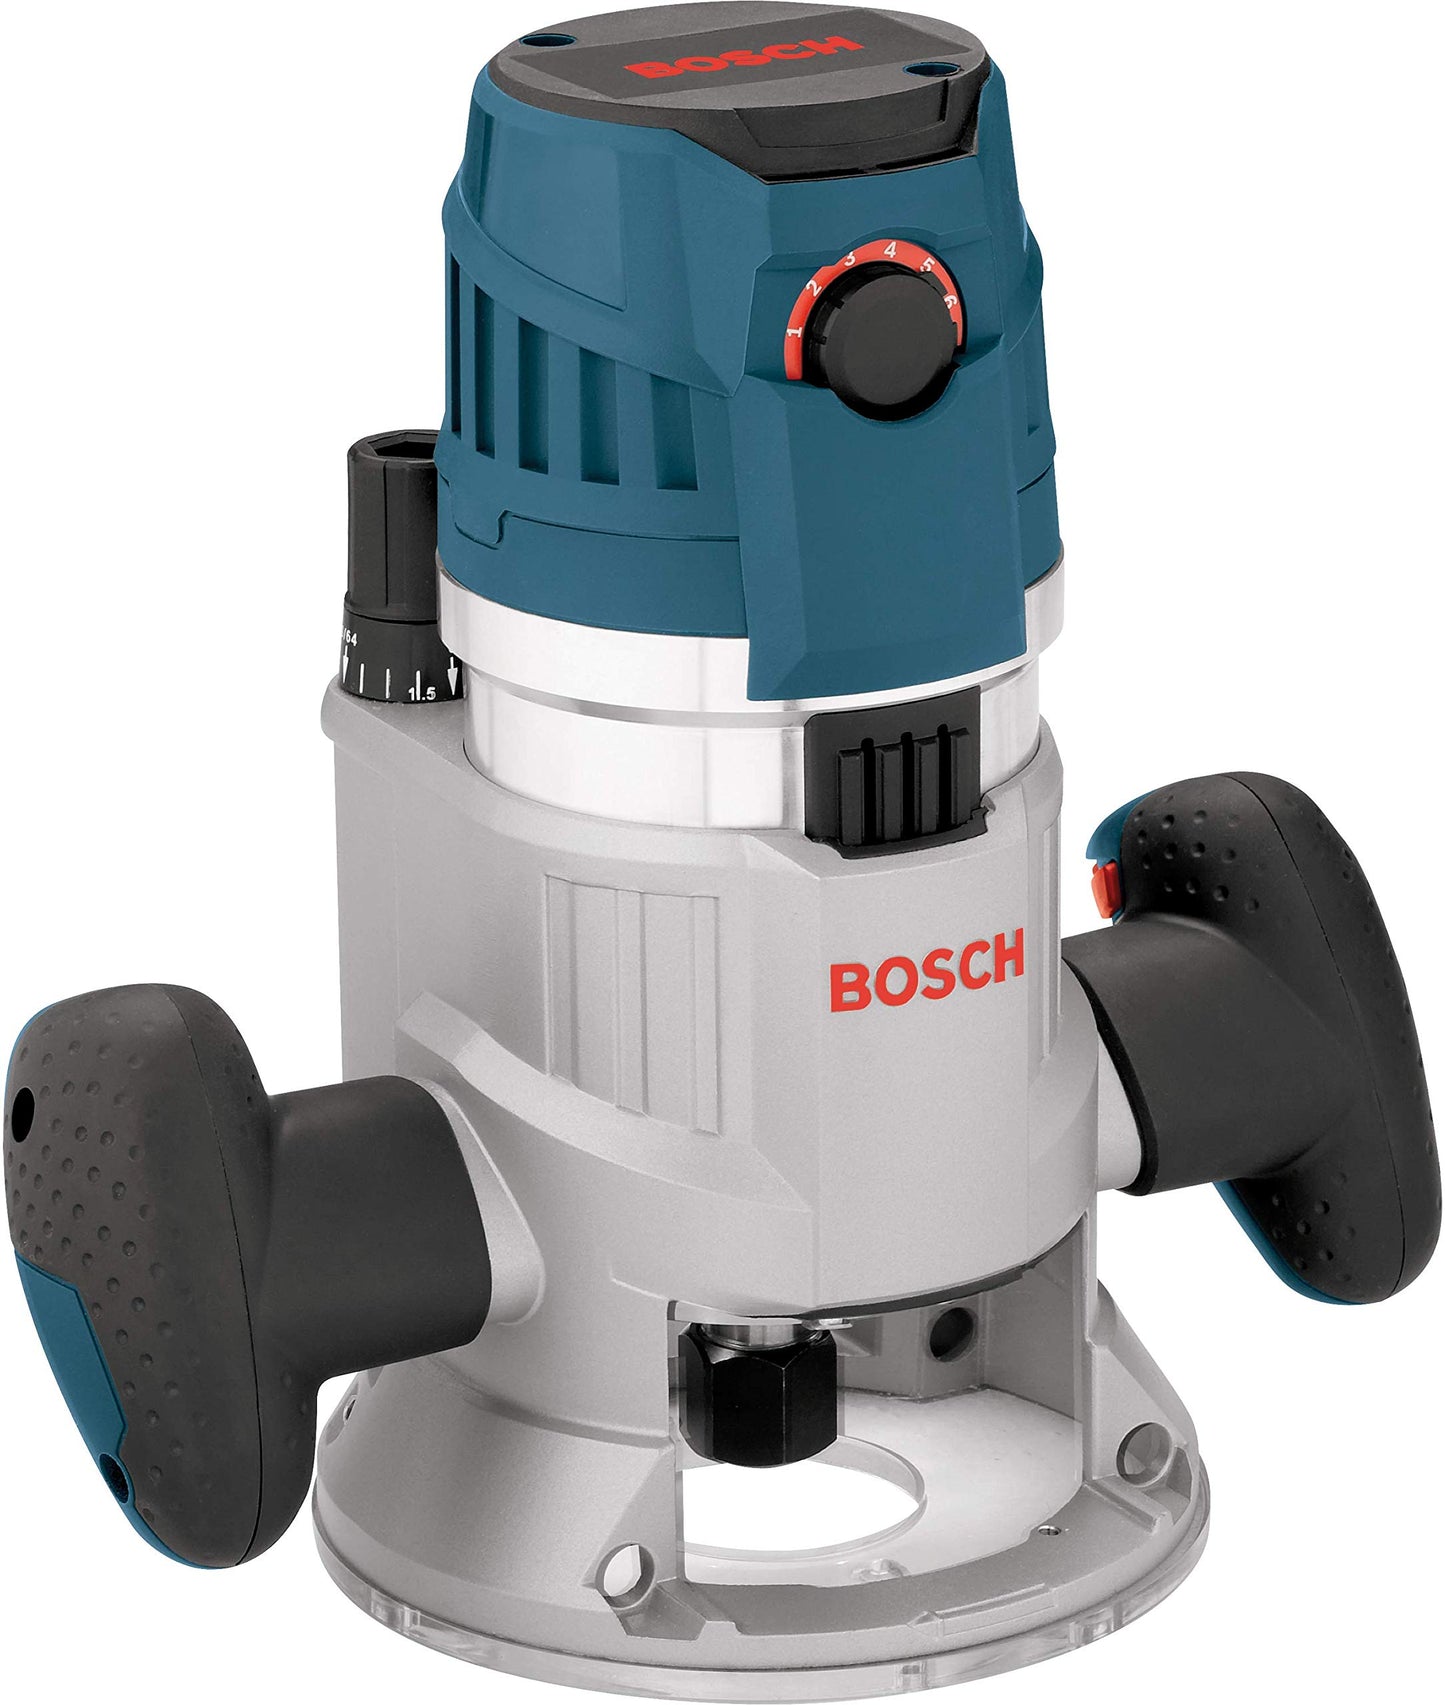 BOSCH MRC23EVSK Combination Router 15 Amp 2.3 Horsepower Corded Variable Speed Combination Plunge & Fixed-Base Router Kit with Hard Case